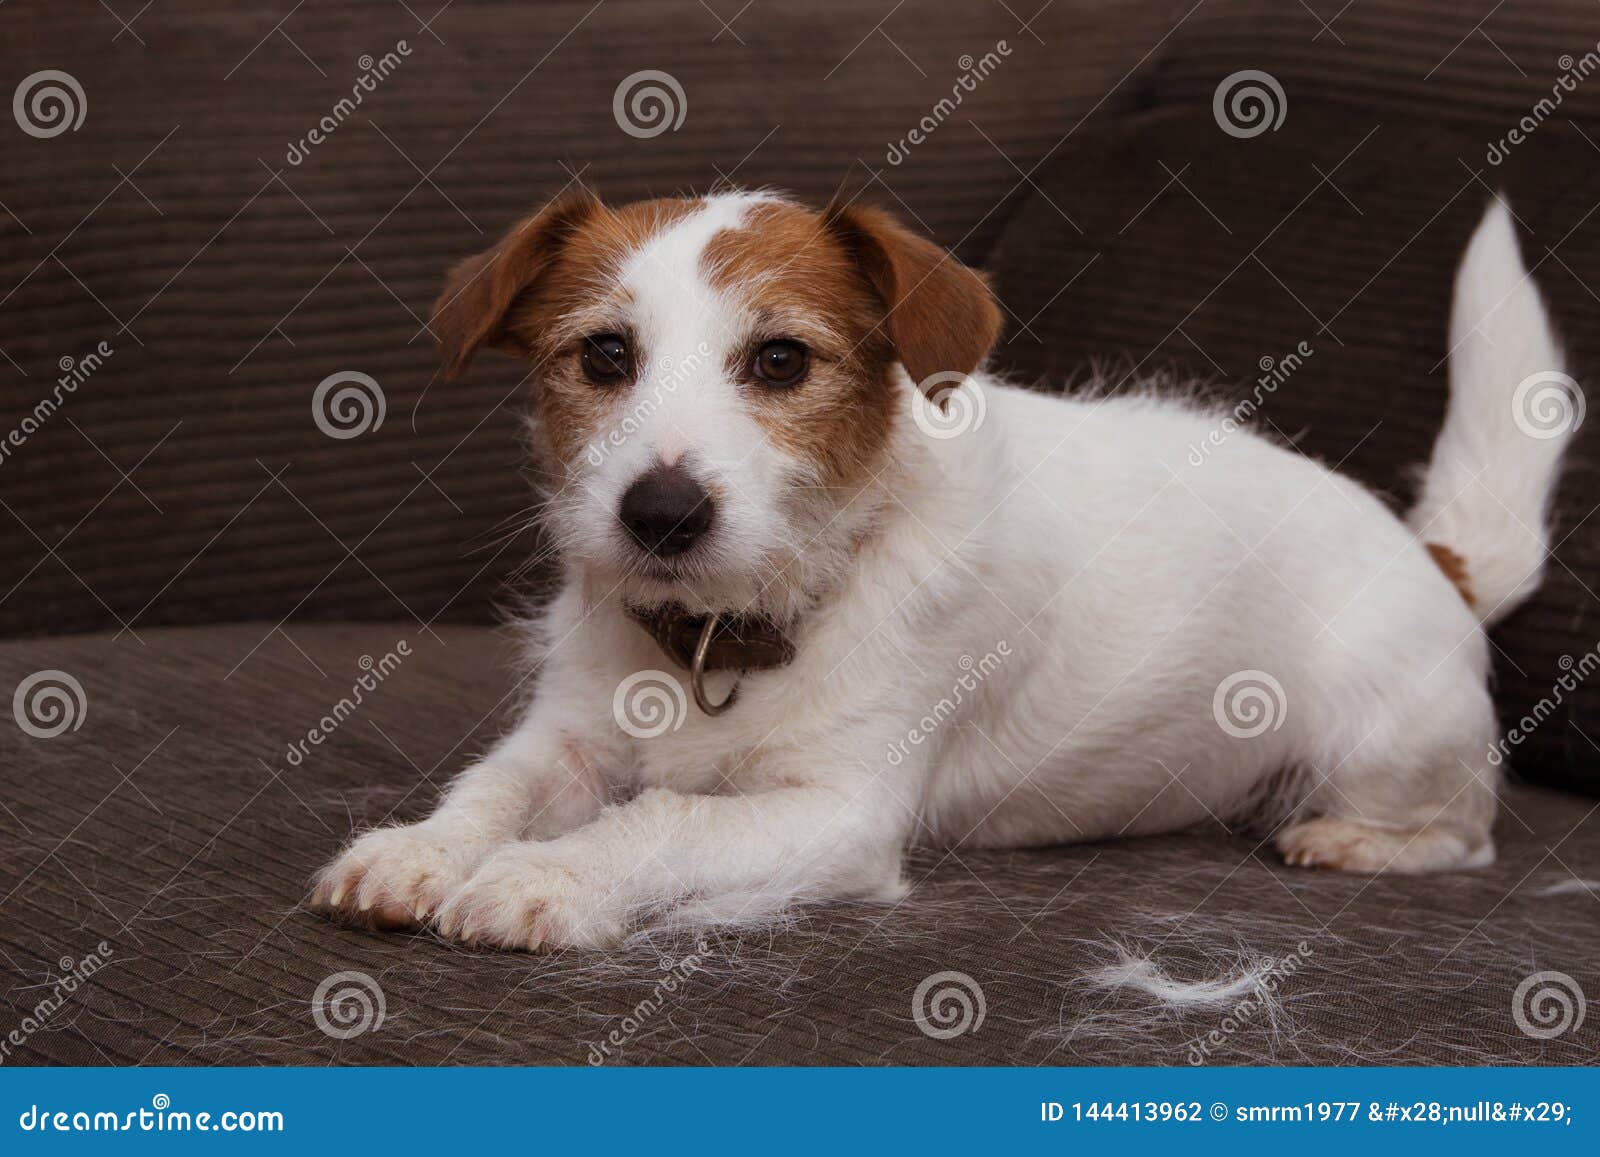 long haired jack russell shedding